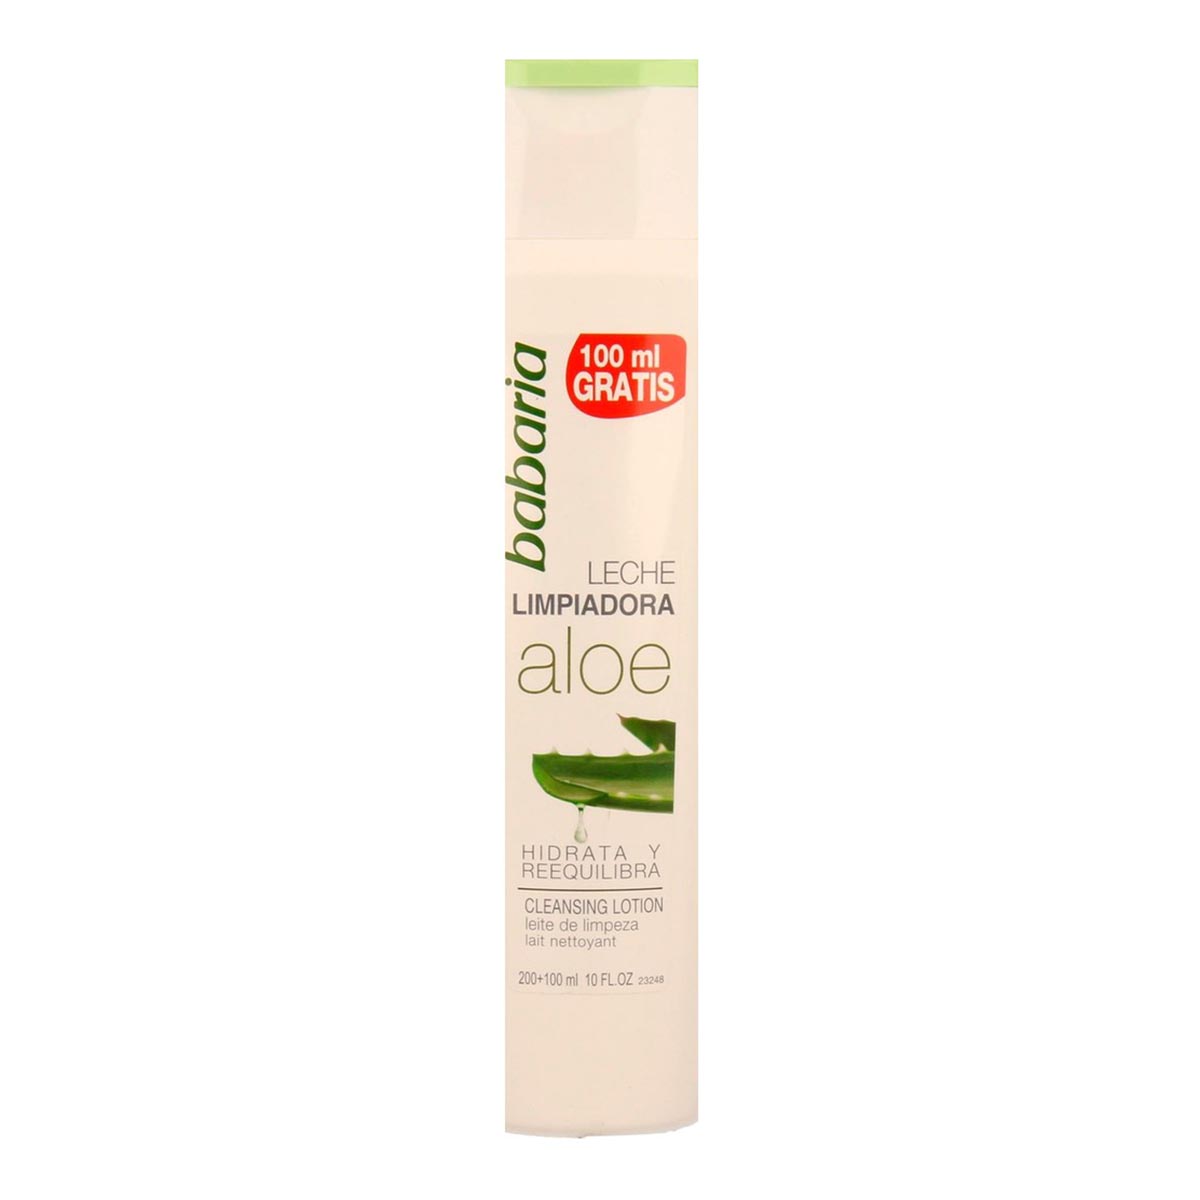 Image of Babaria Aloe Vera Cleansing Lotion 200ml + 100ml Free